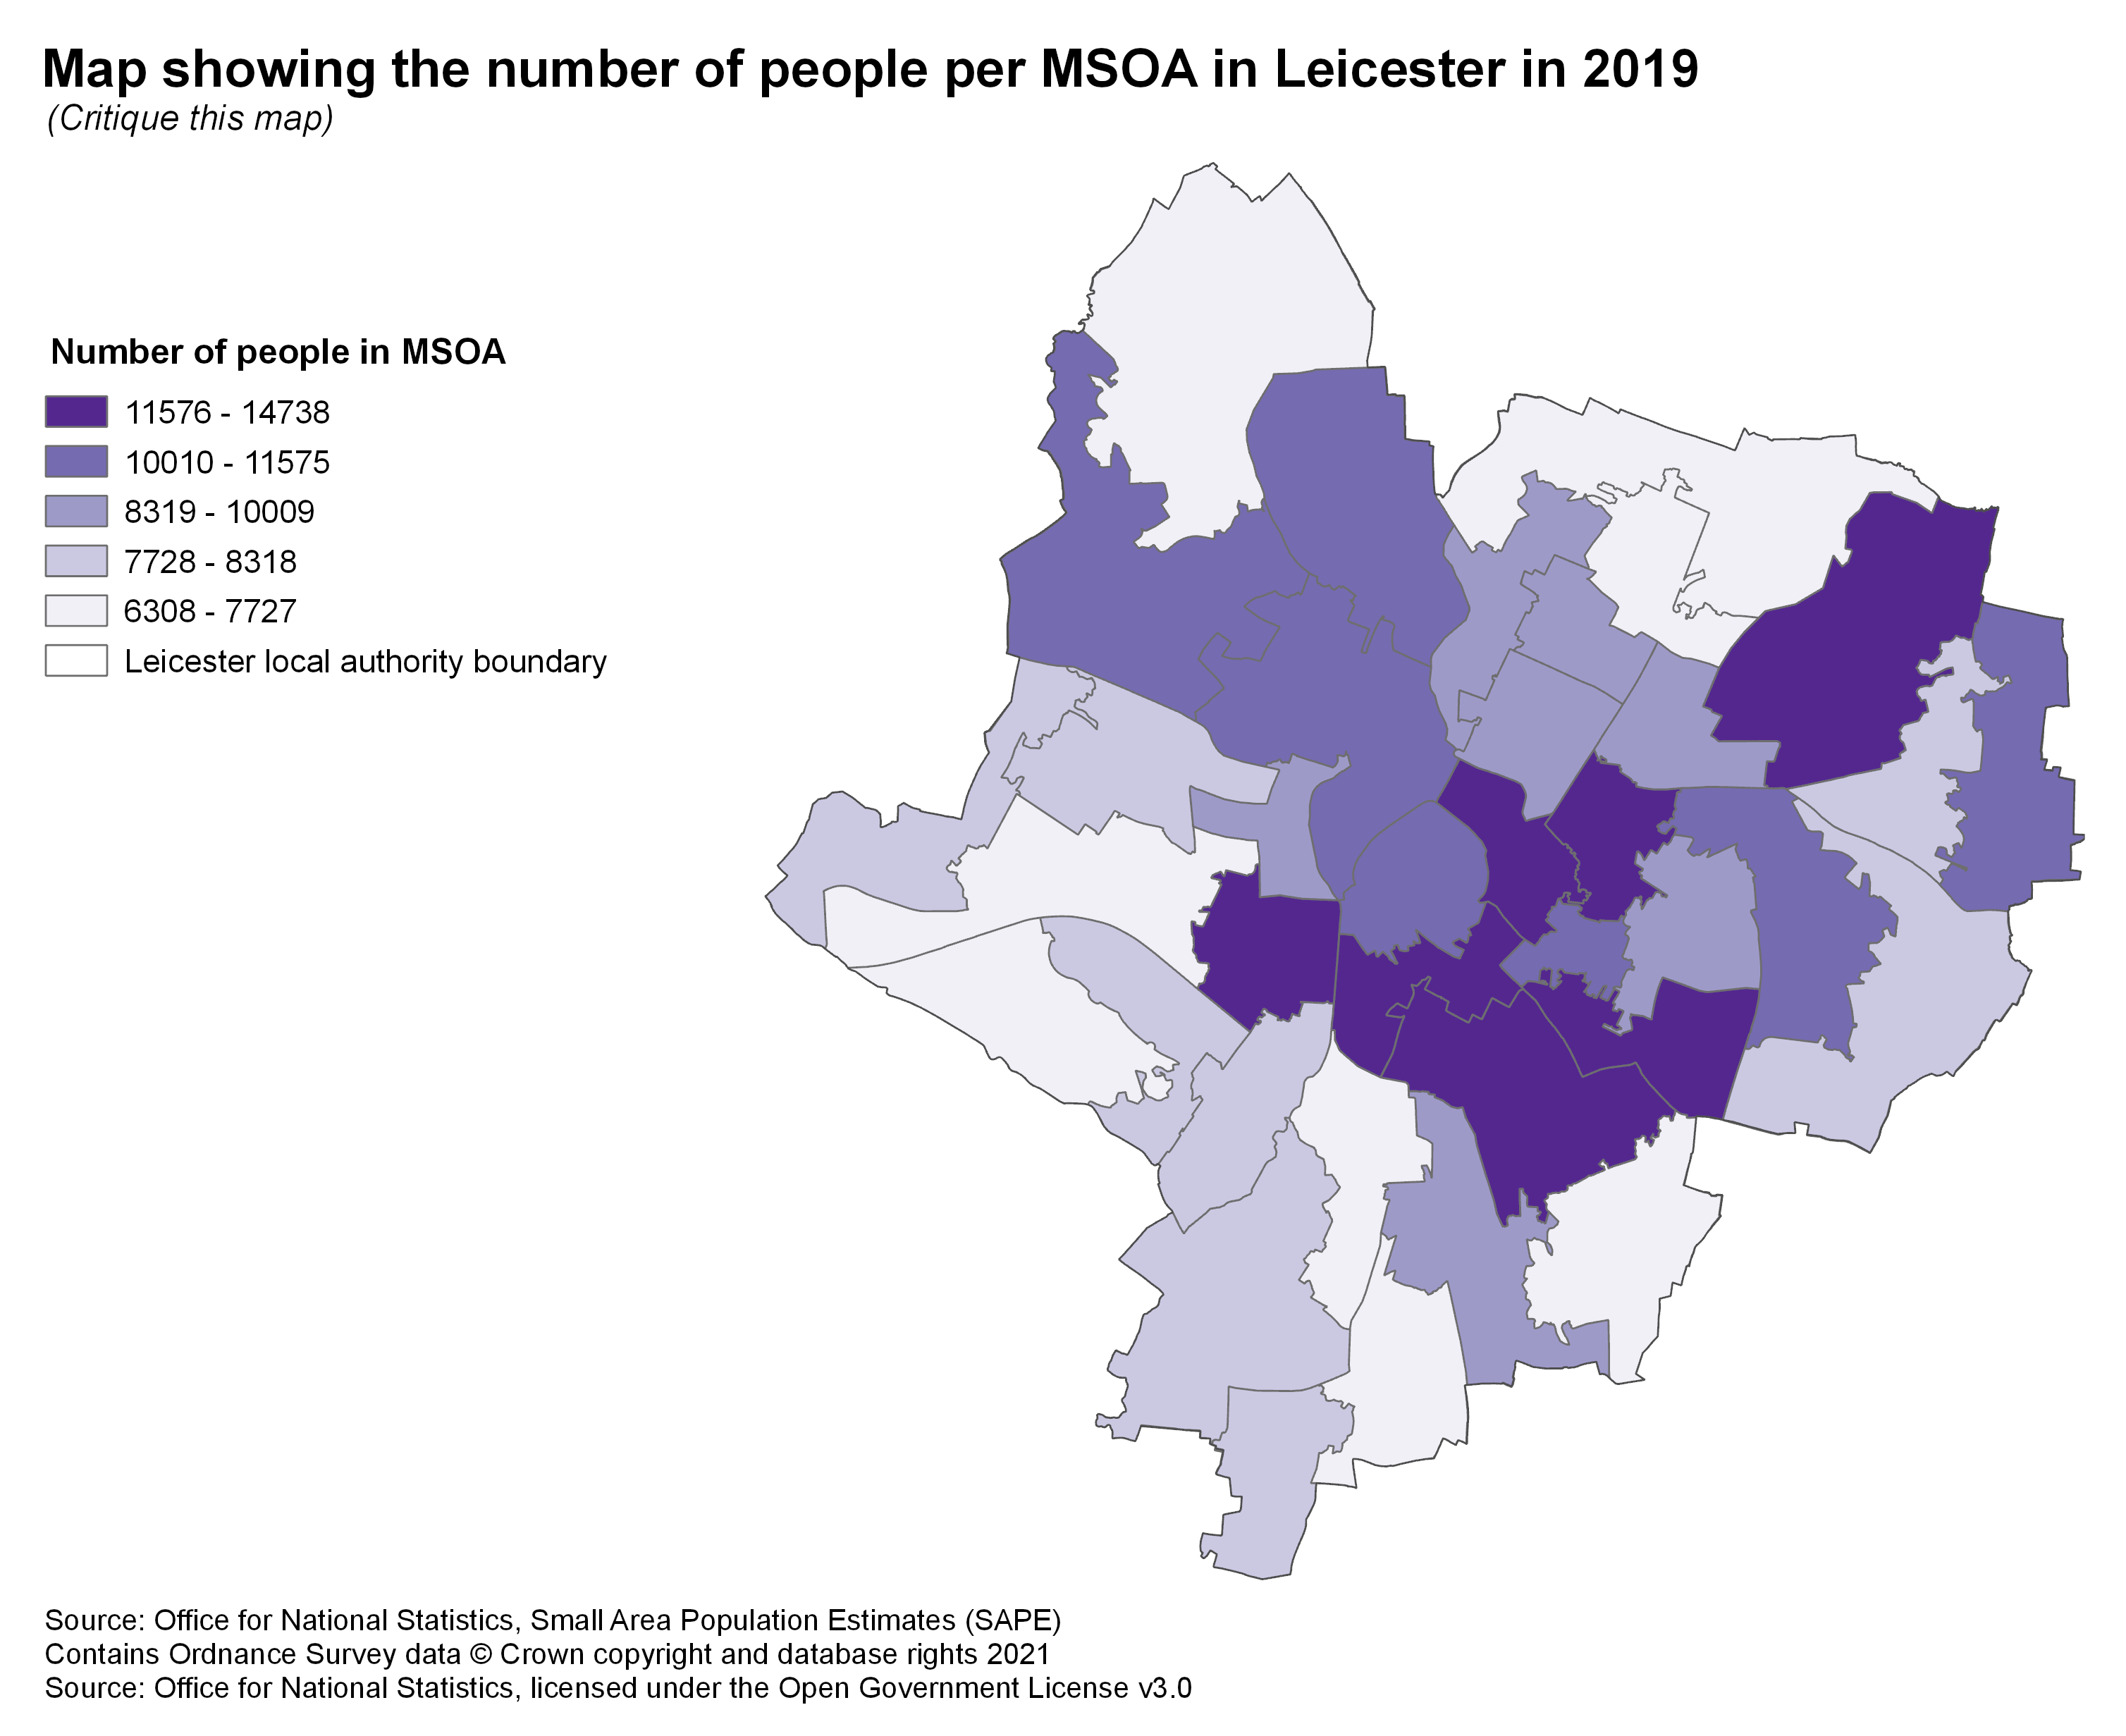 A bad version of a map showing population in Leicester.